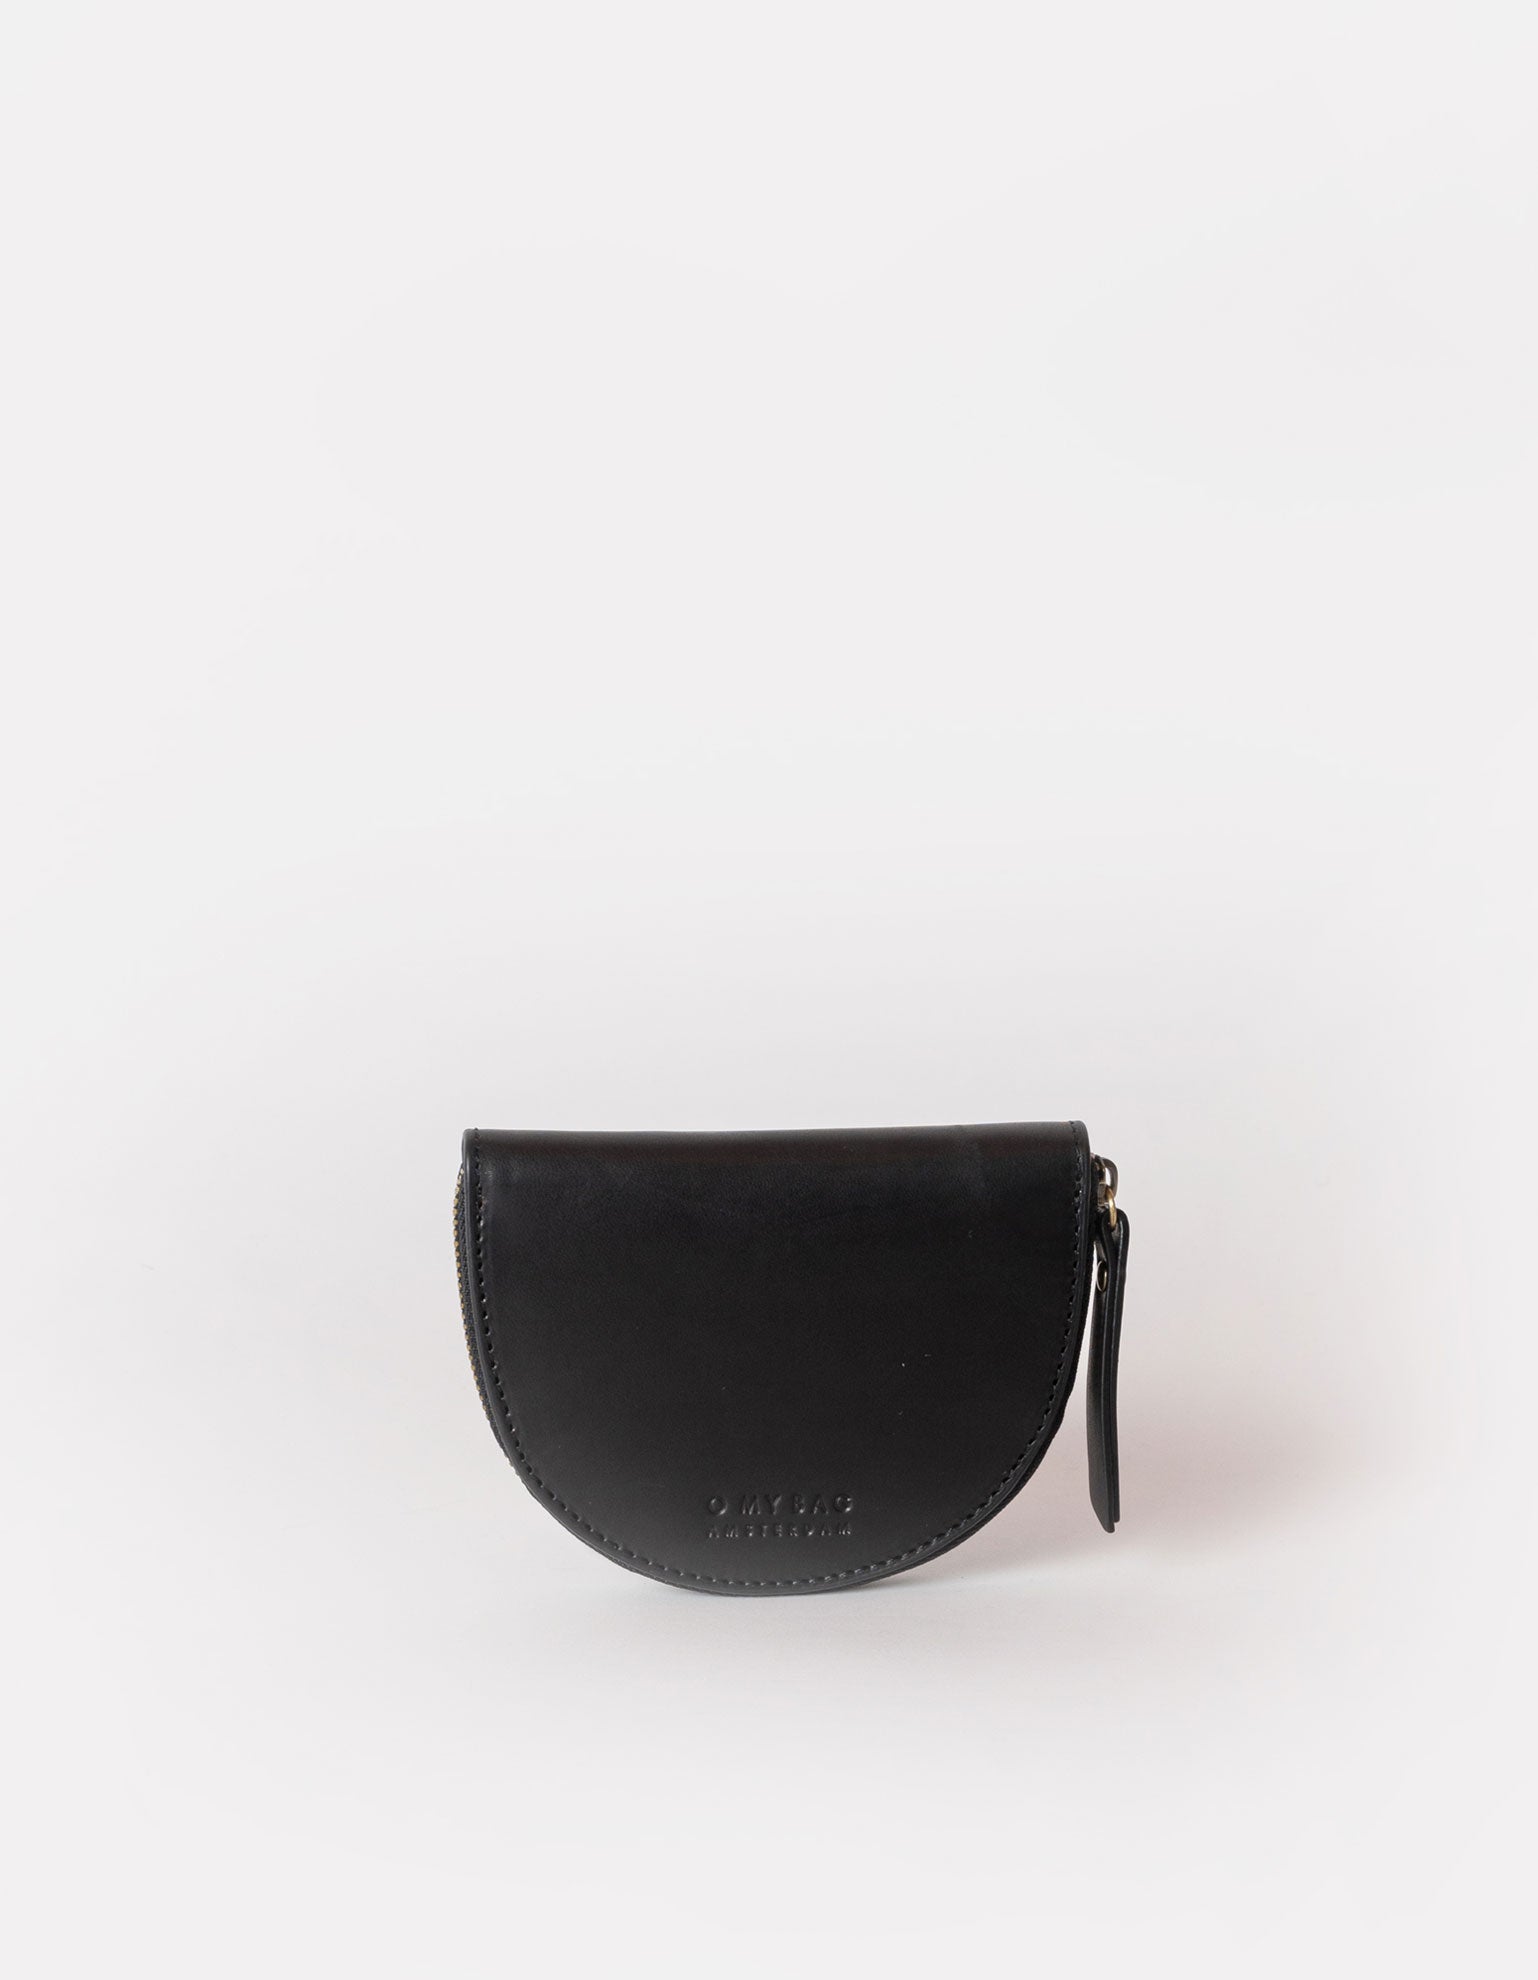 Laura Purse Black Classic Leather. Round moon shape coin purse unisex wallet. Front product image.